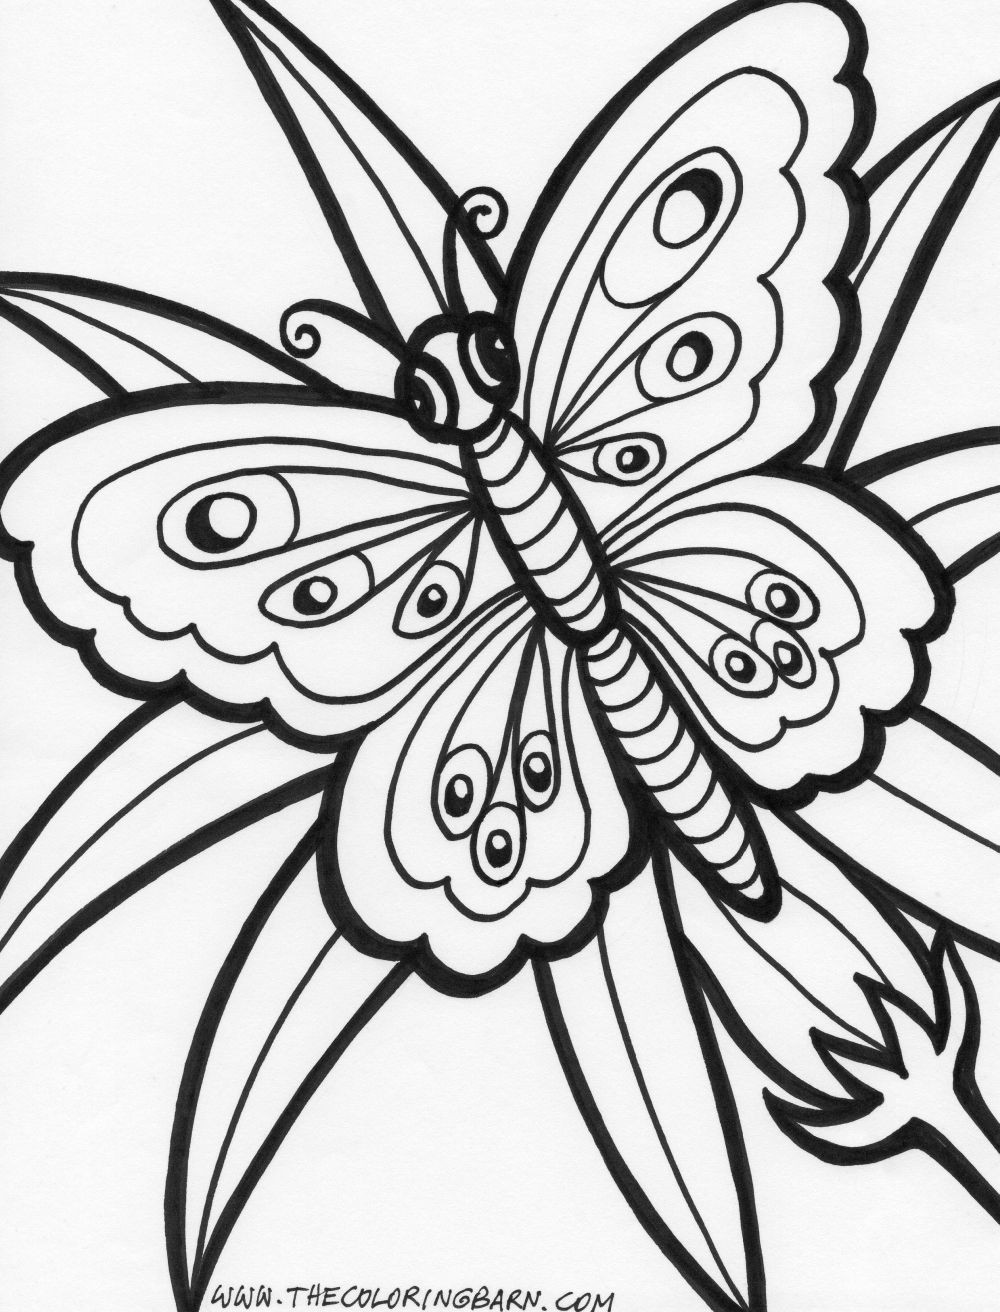 Free Printable Coloring Pages Of Flowers
 summer flowers printable coloring pages Free